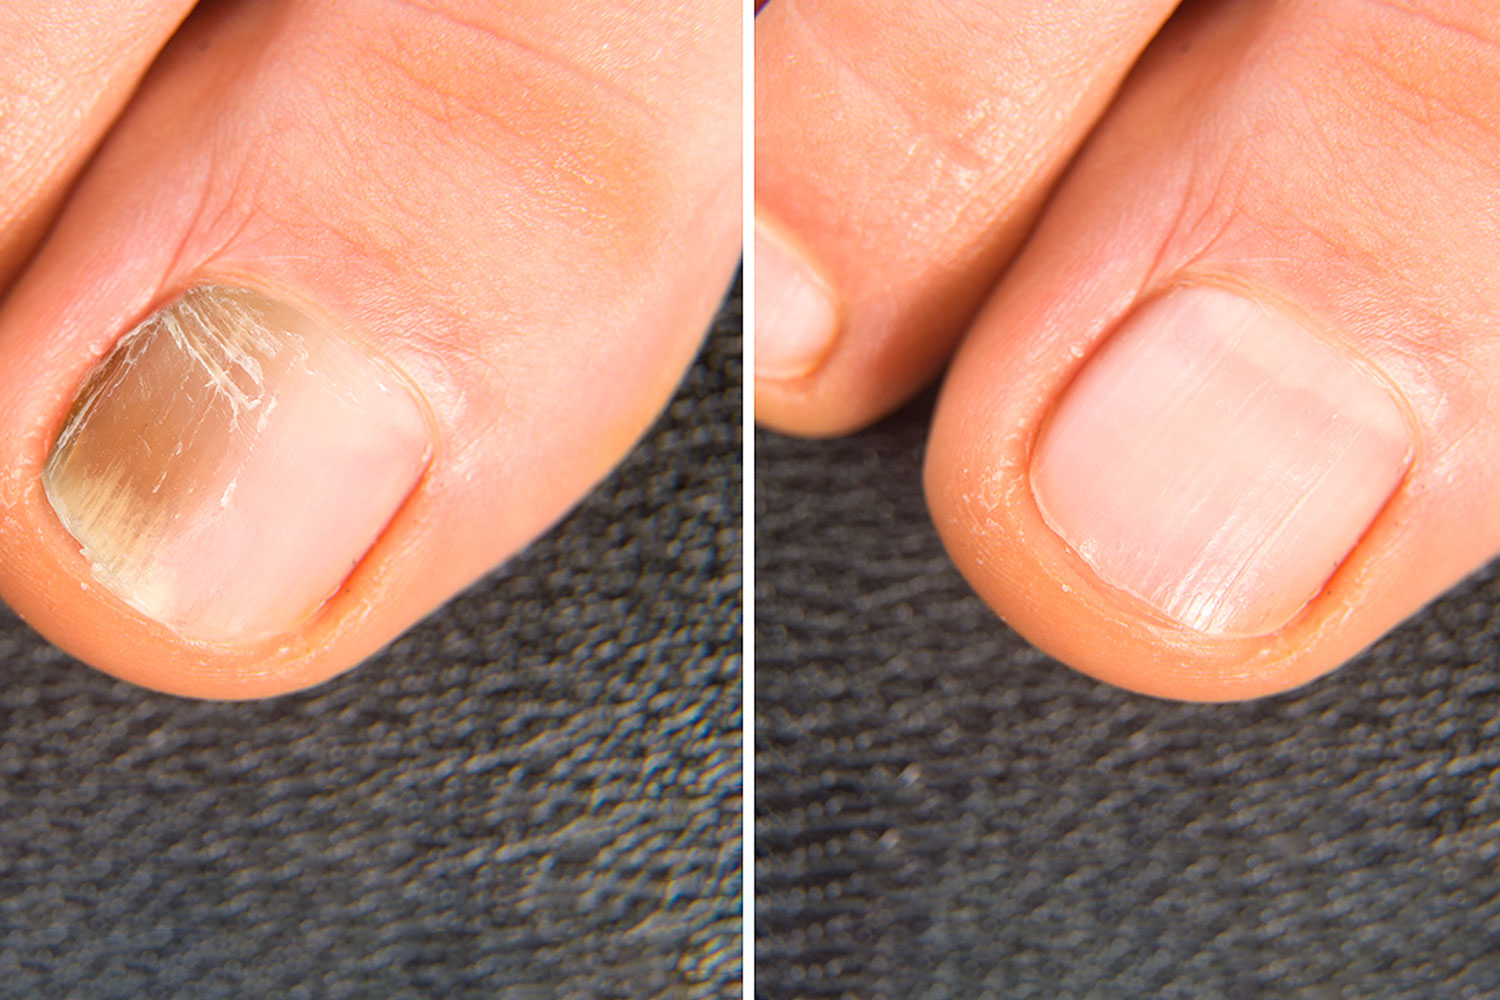 Acrylic nails are causing infections